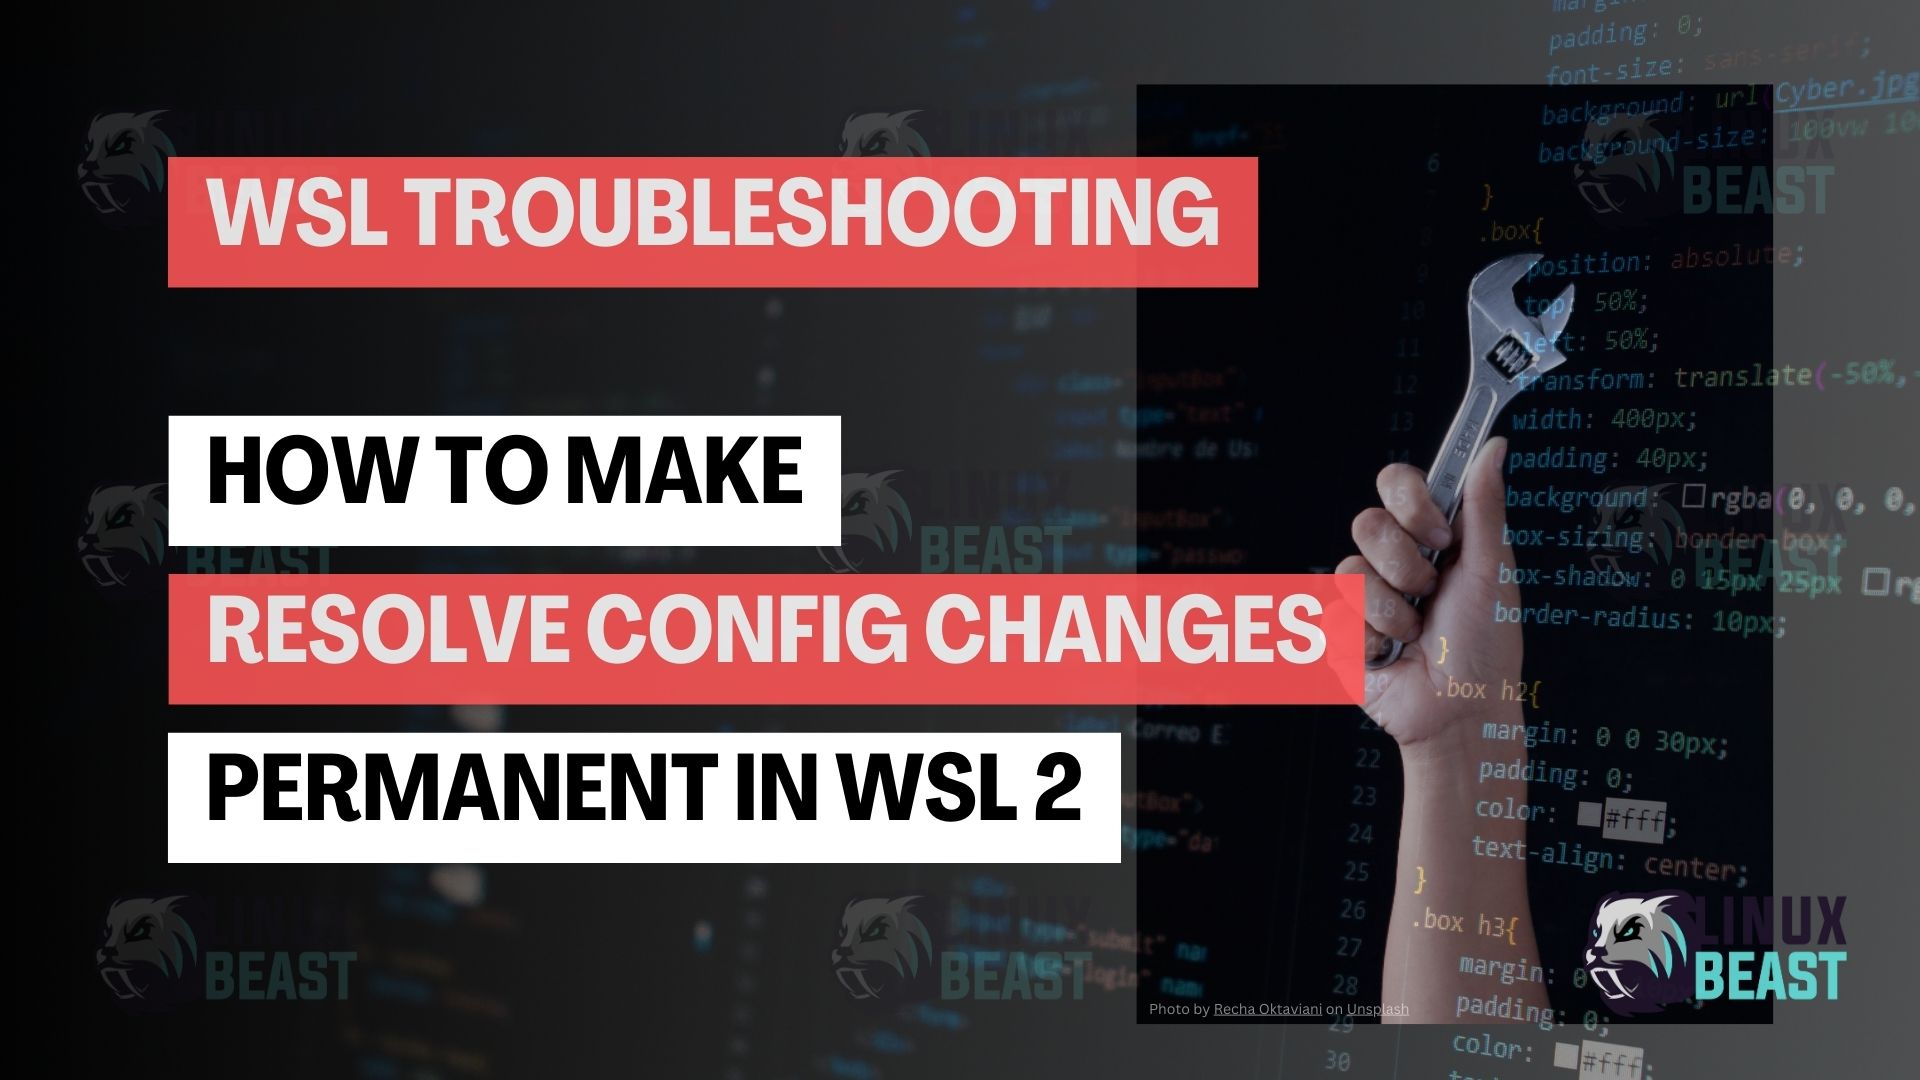 How to Make Resolve Config Changes Permanent in WSL 2